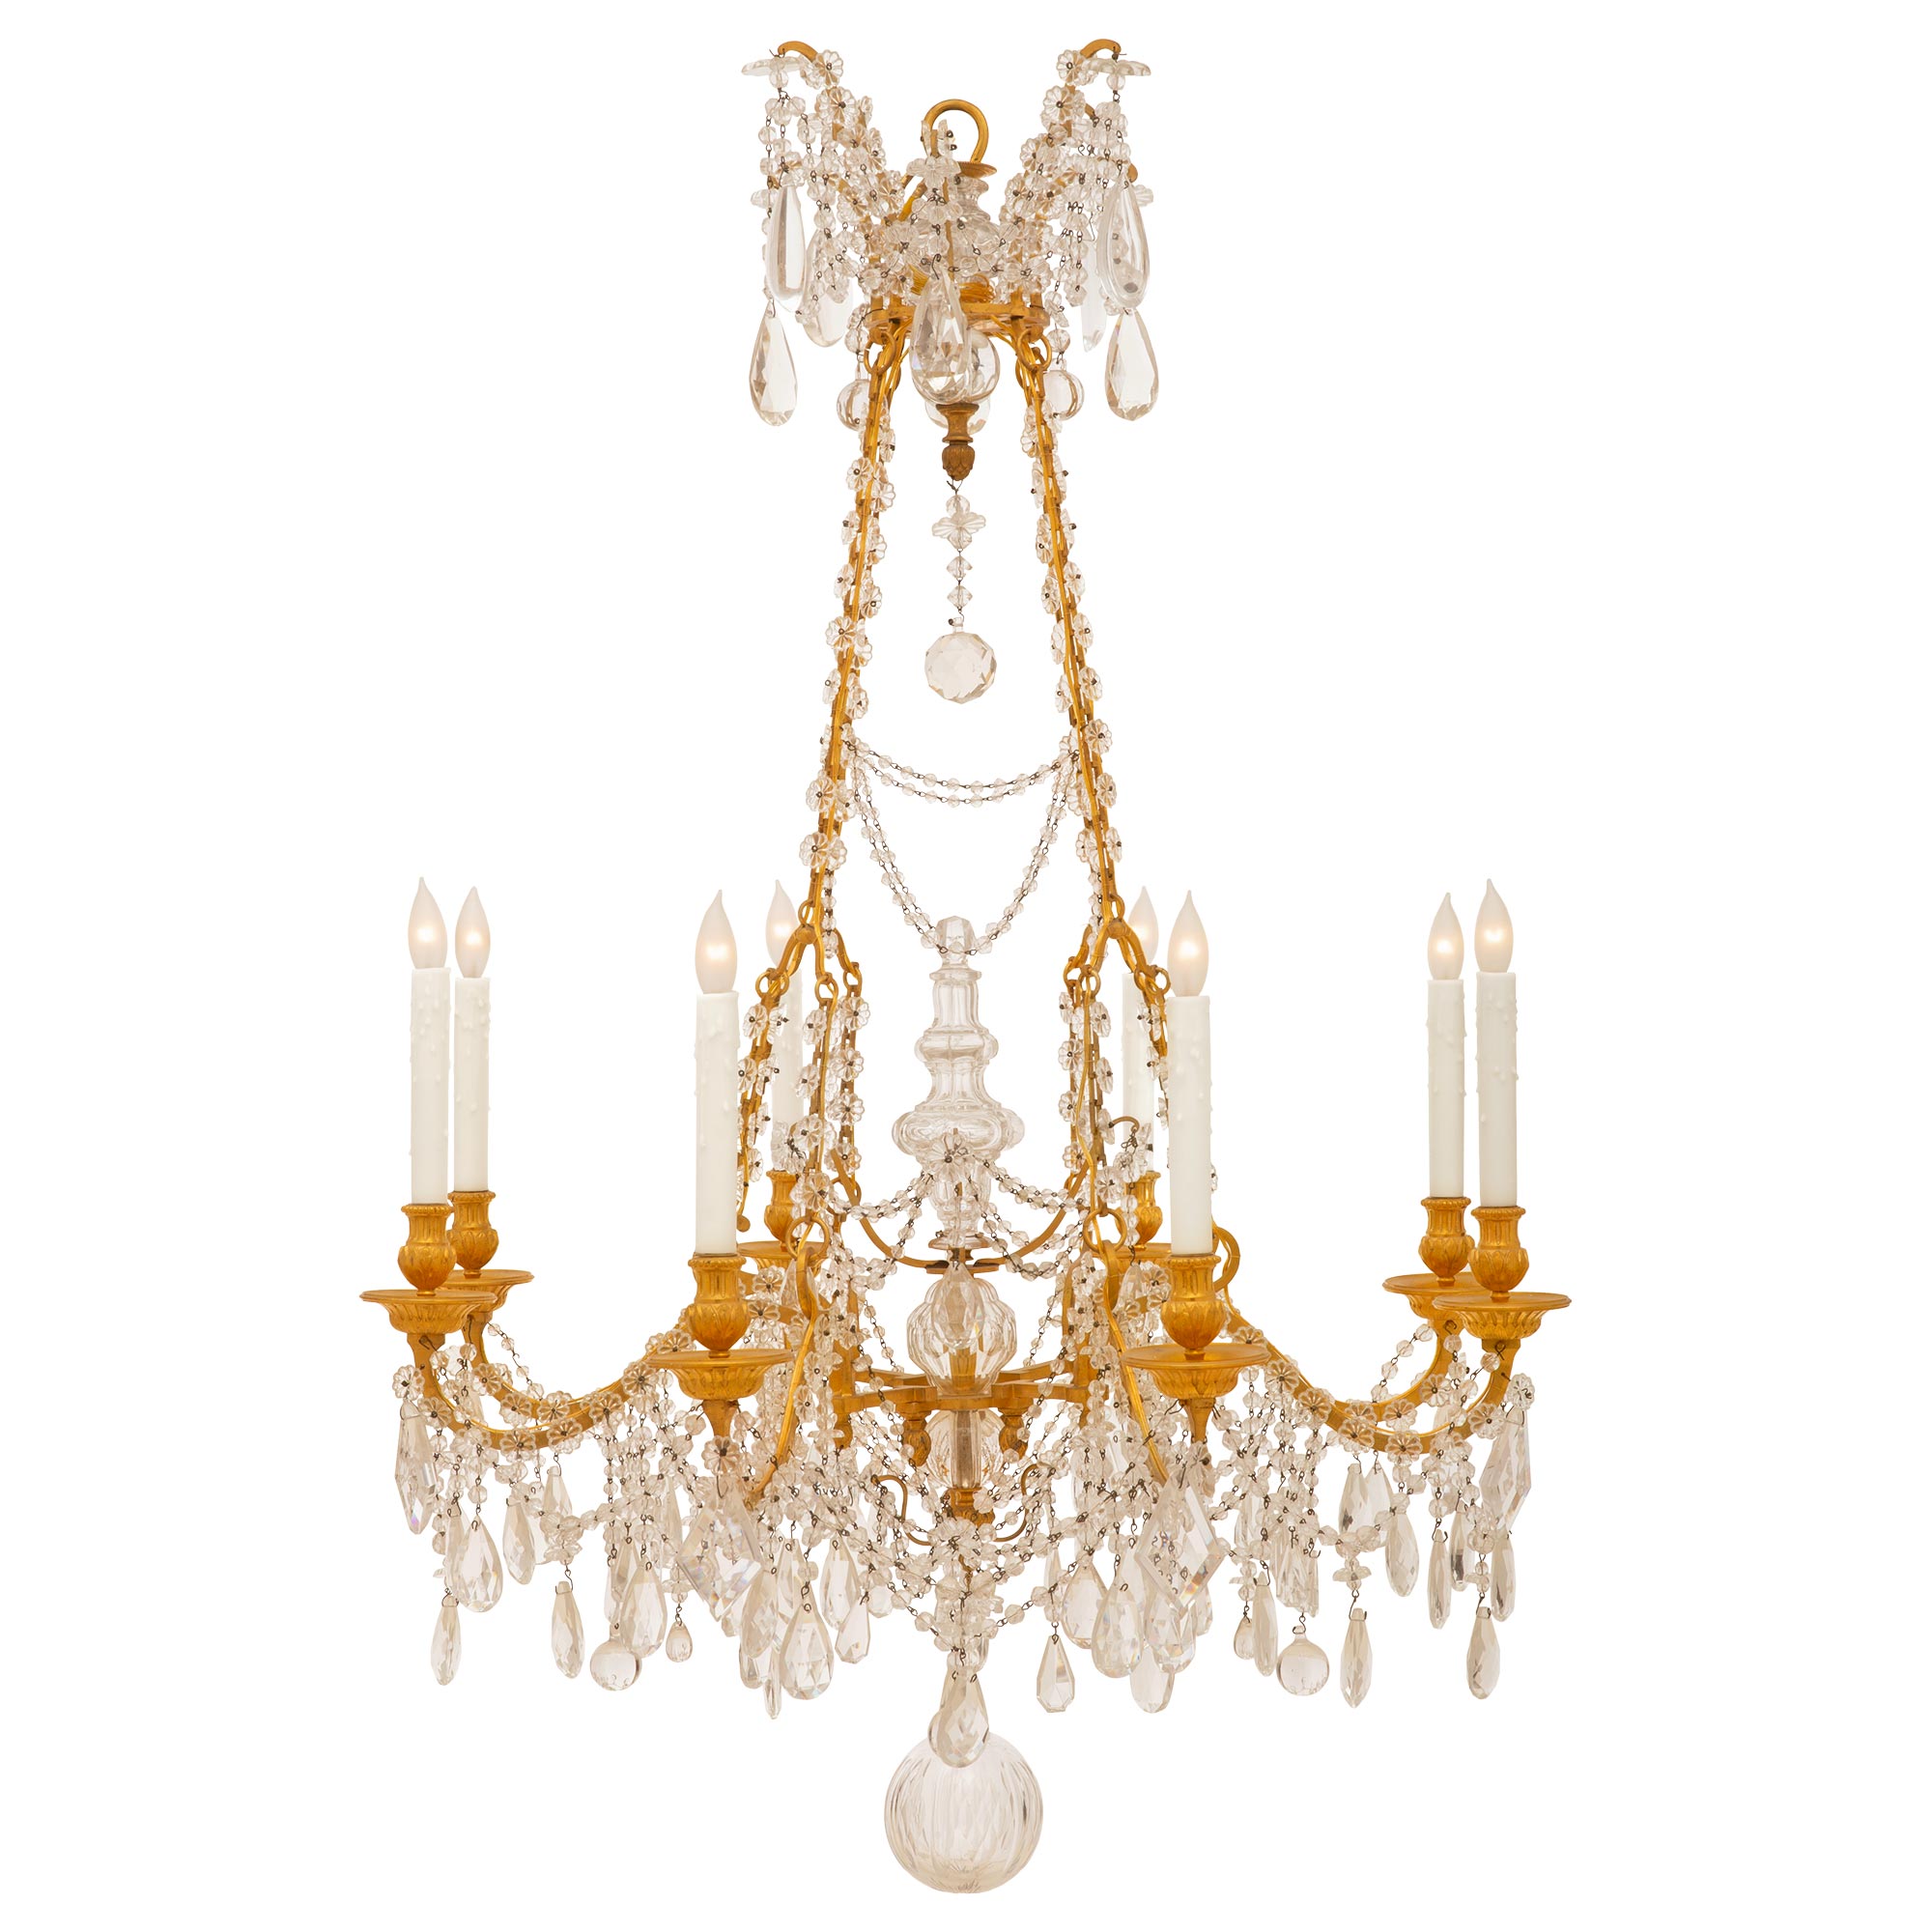 French 19th Century Louis XVI Style Eight-Light Baccarat Crystal Chandelier For Sale